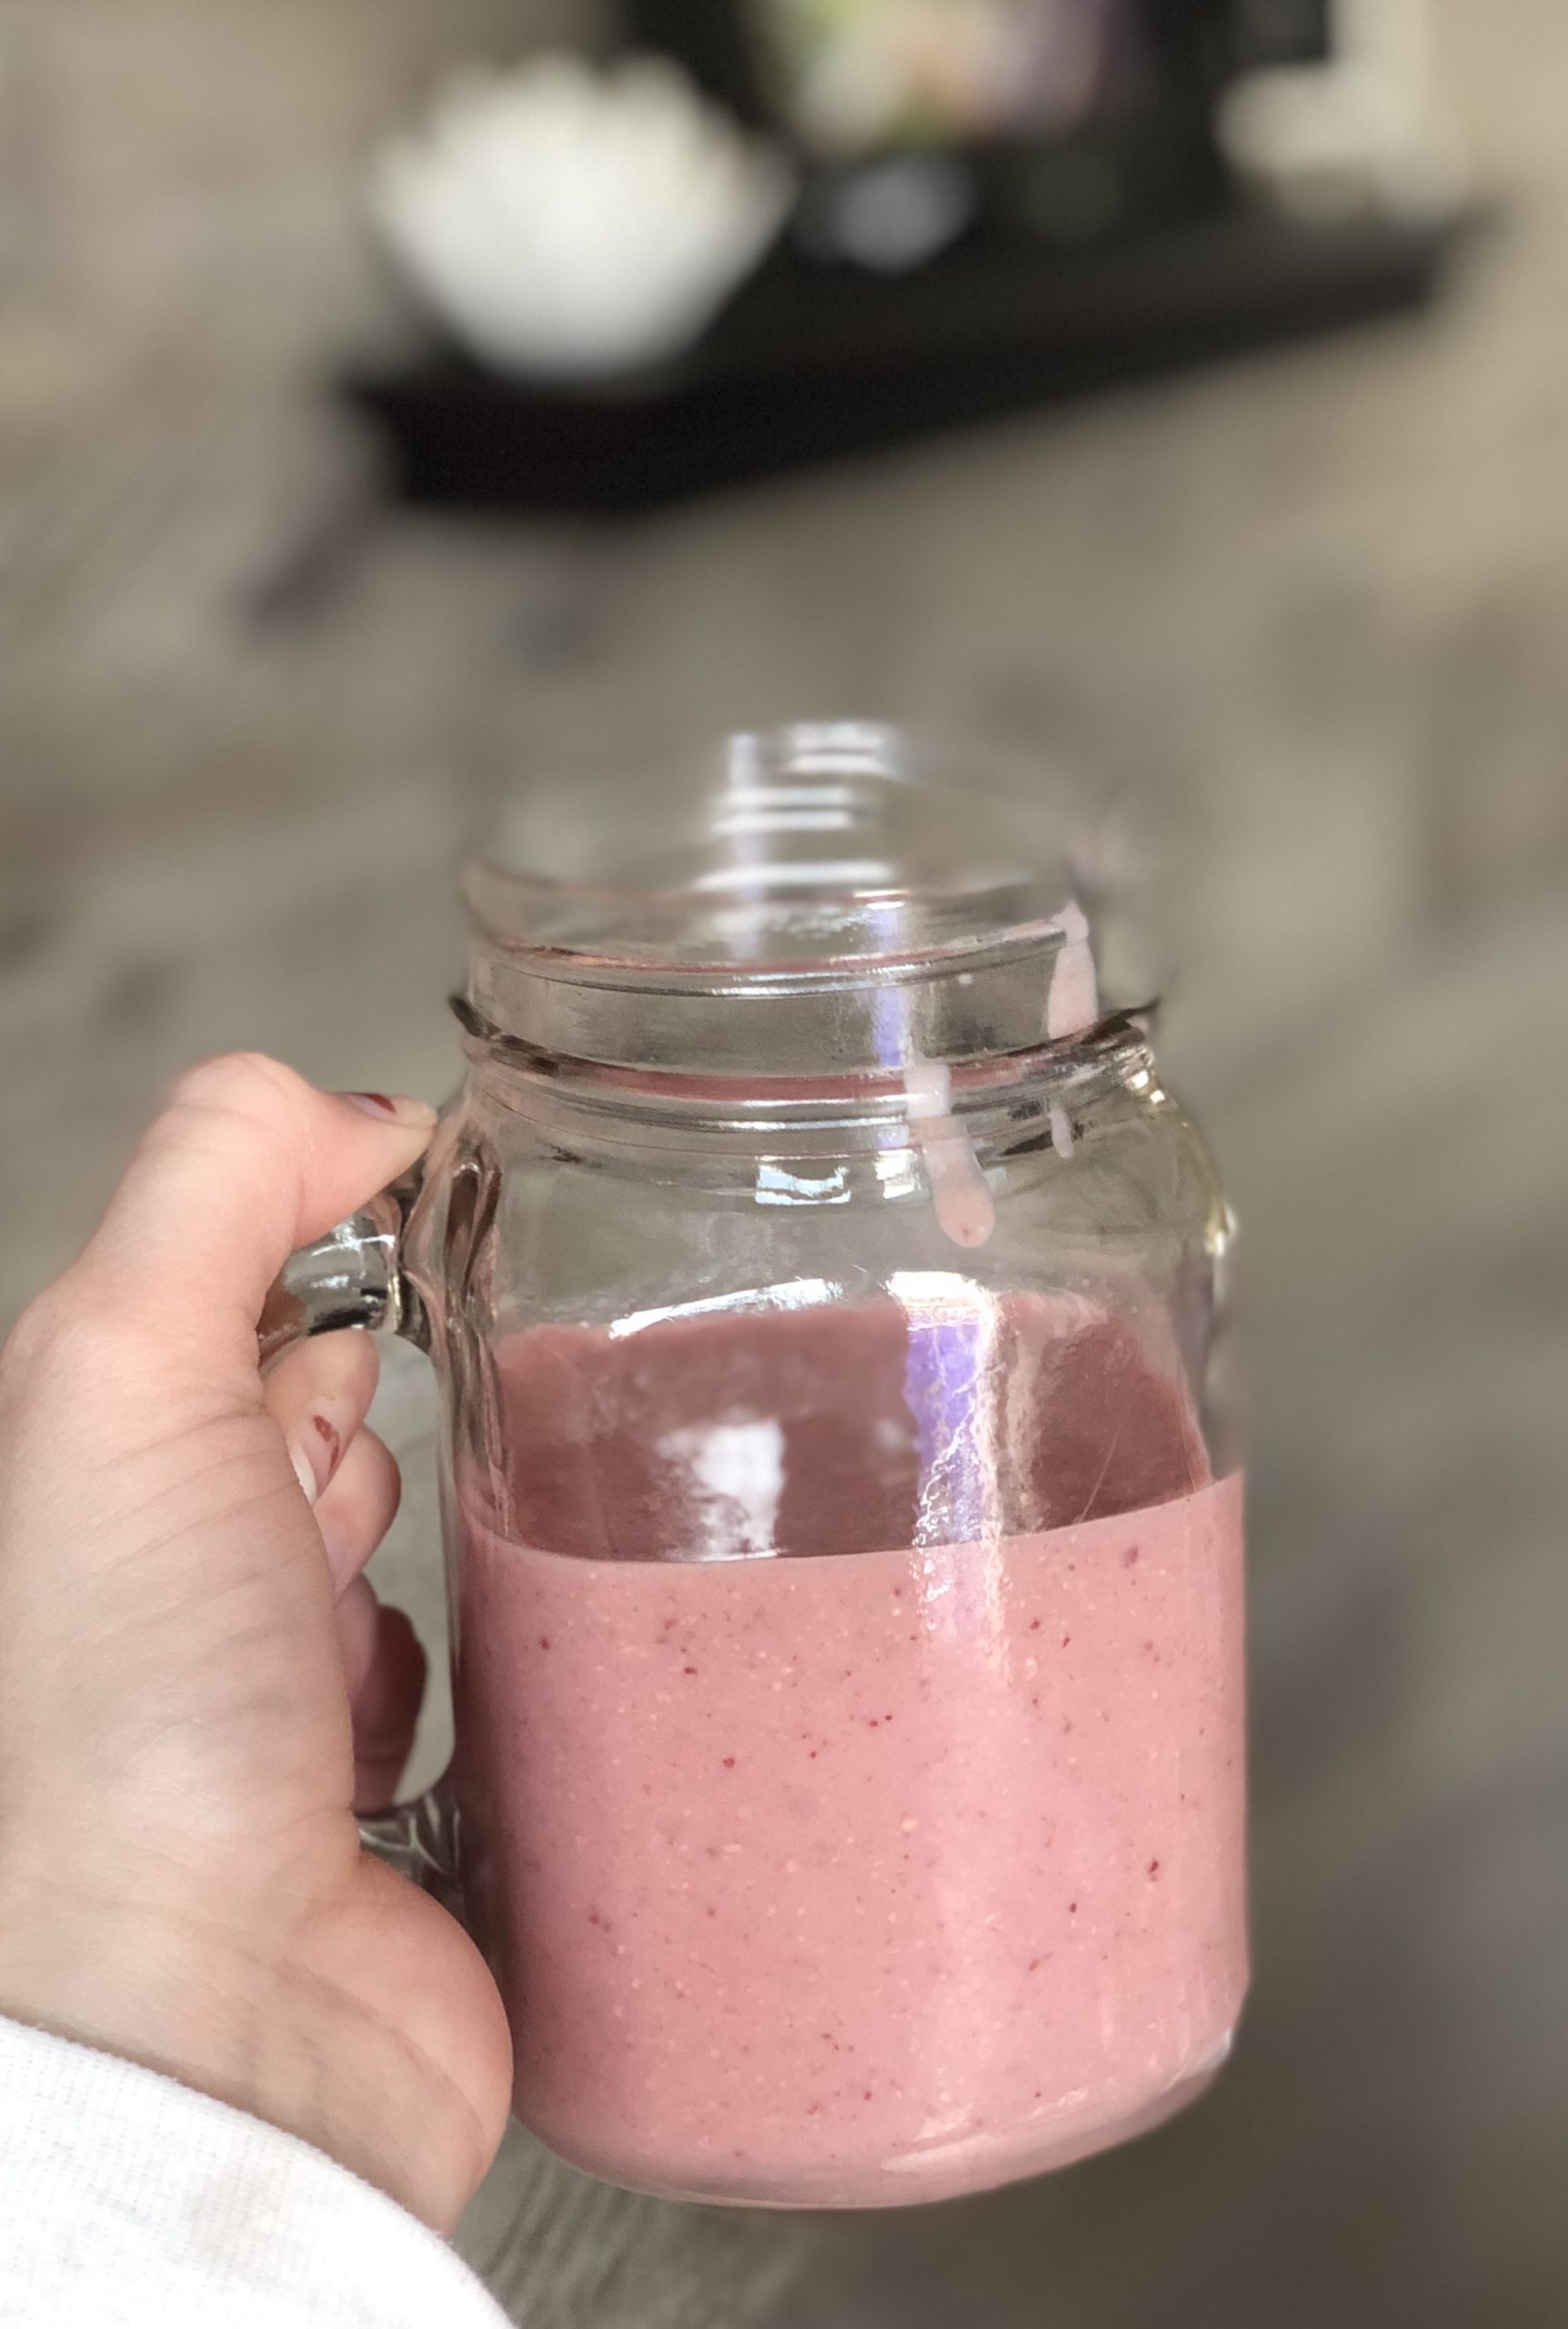 strawberry banana smoothie in a jar